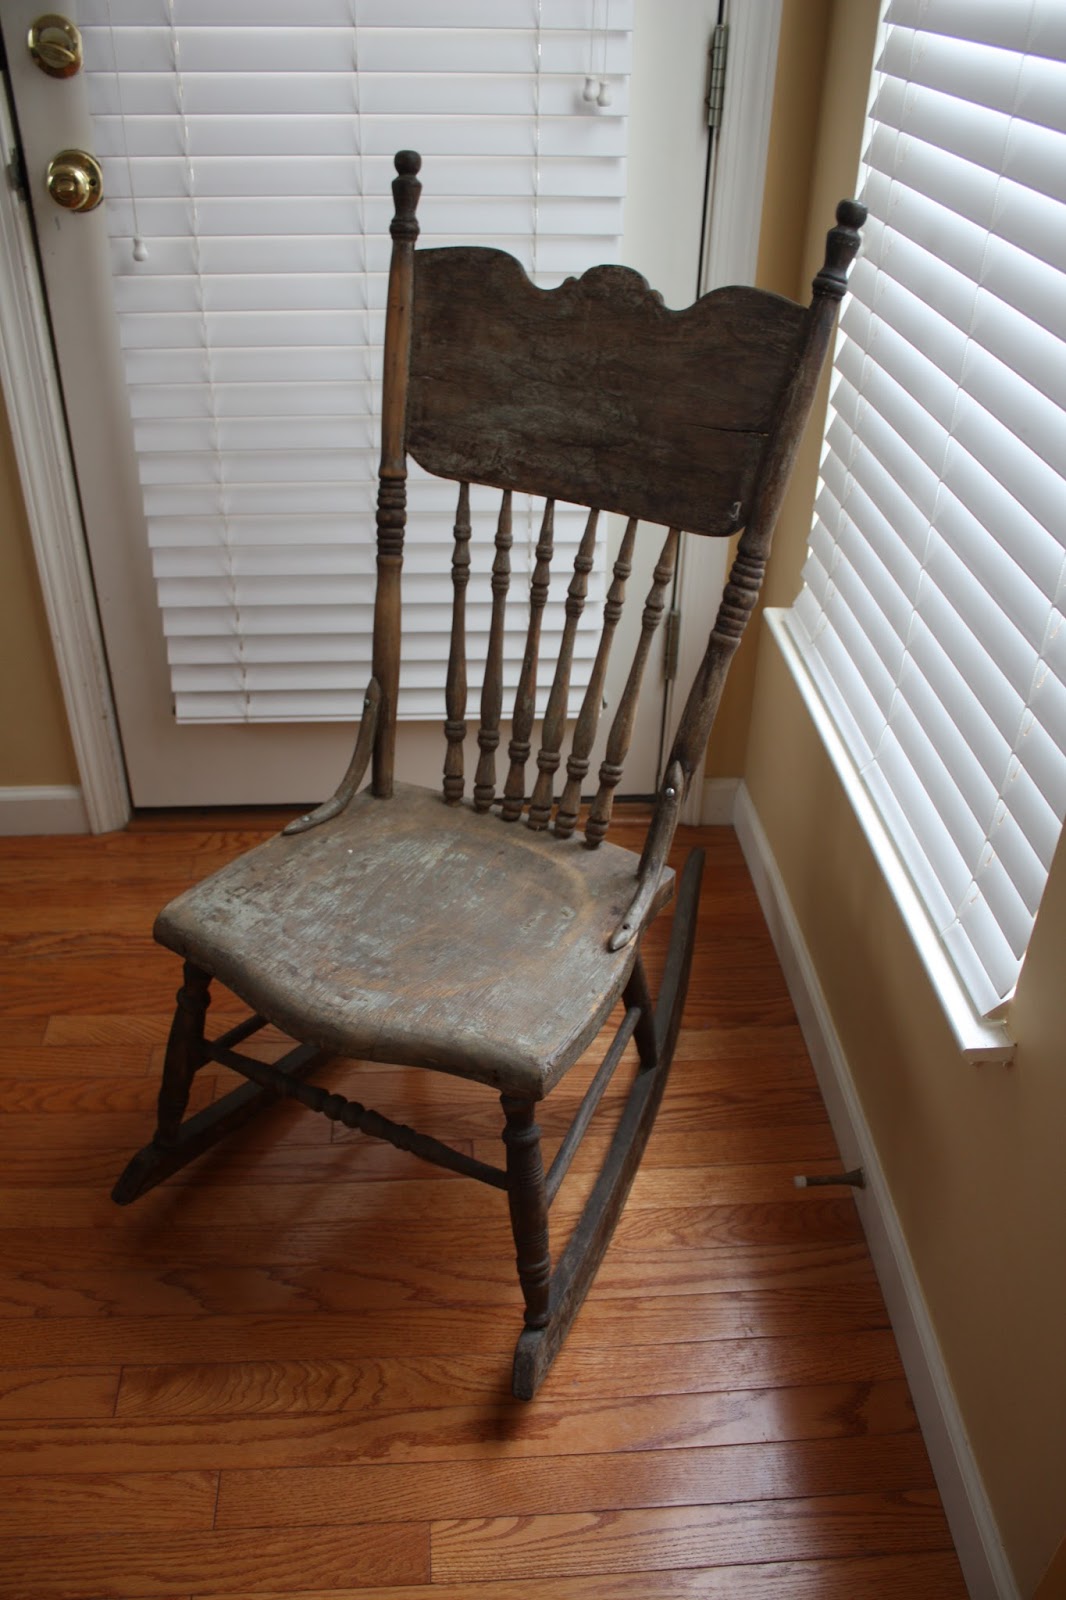 Antique Pressed Back Rocking Chair